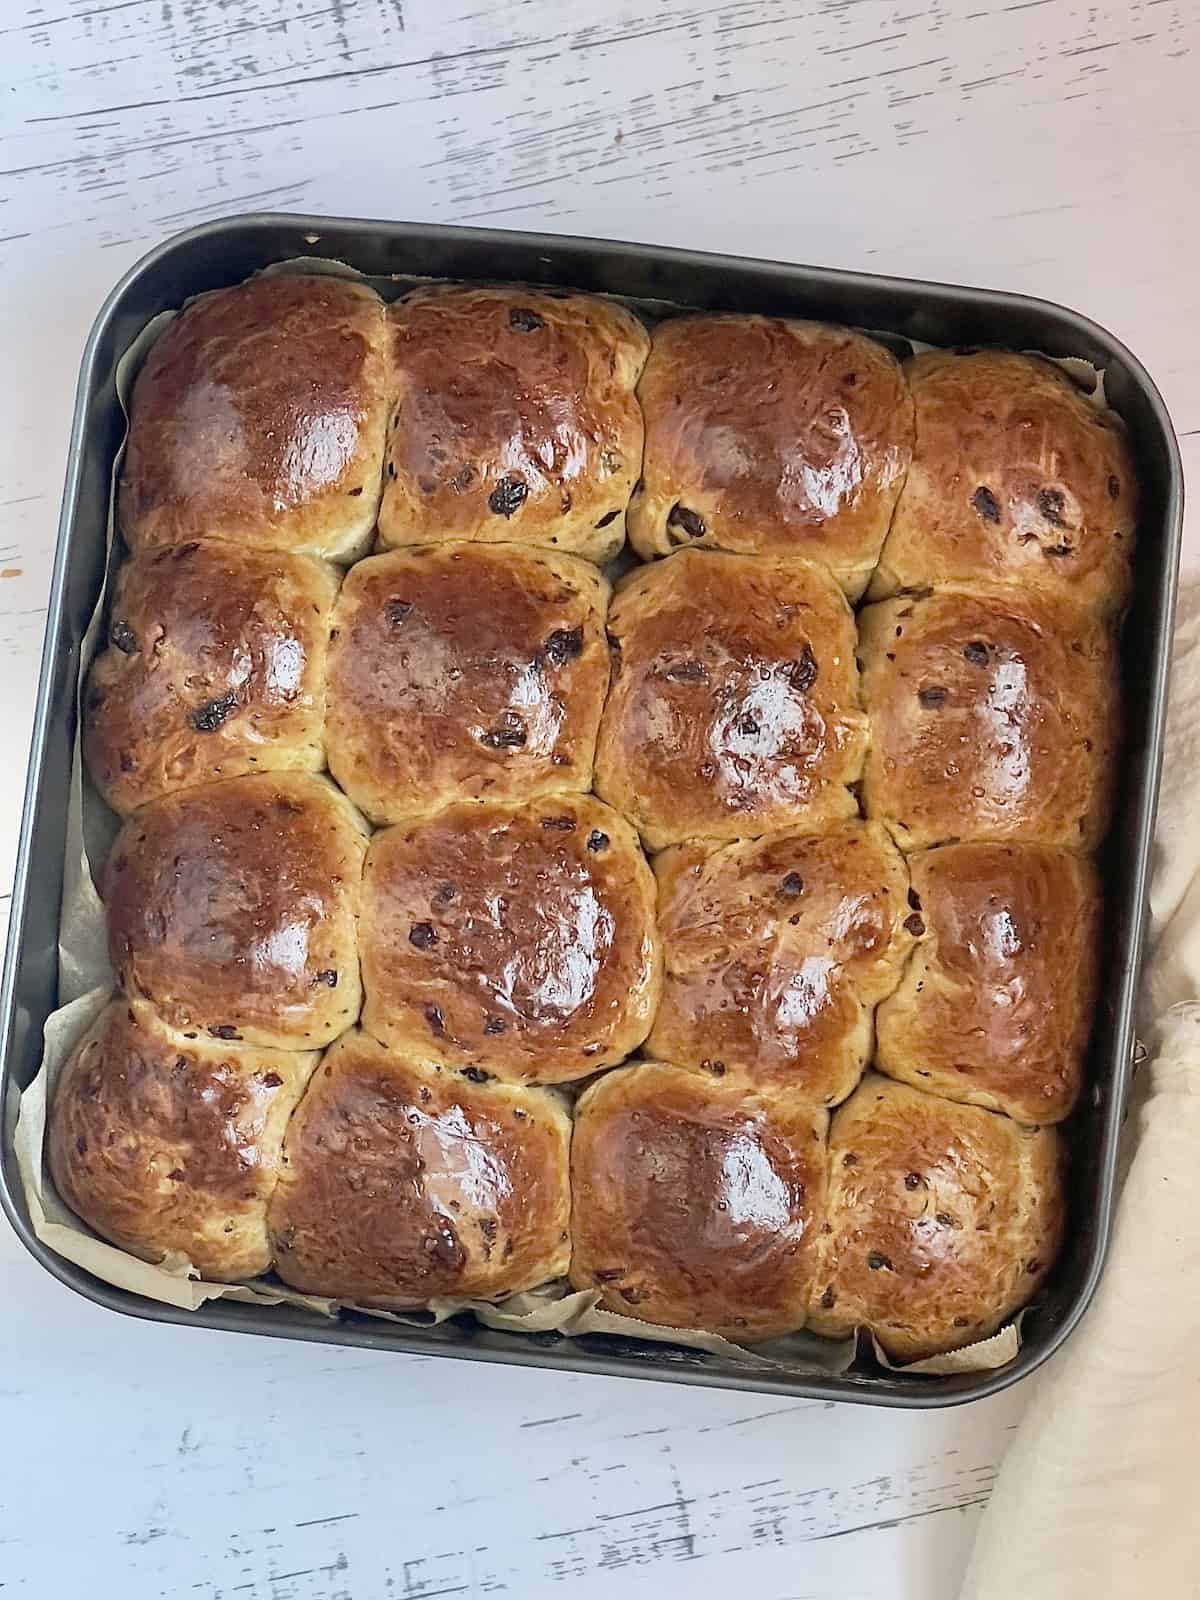 baked hot cross buns in a square pan cooling